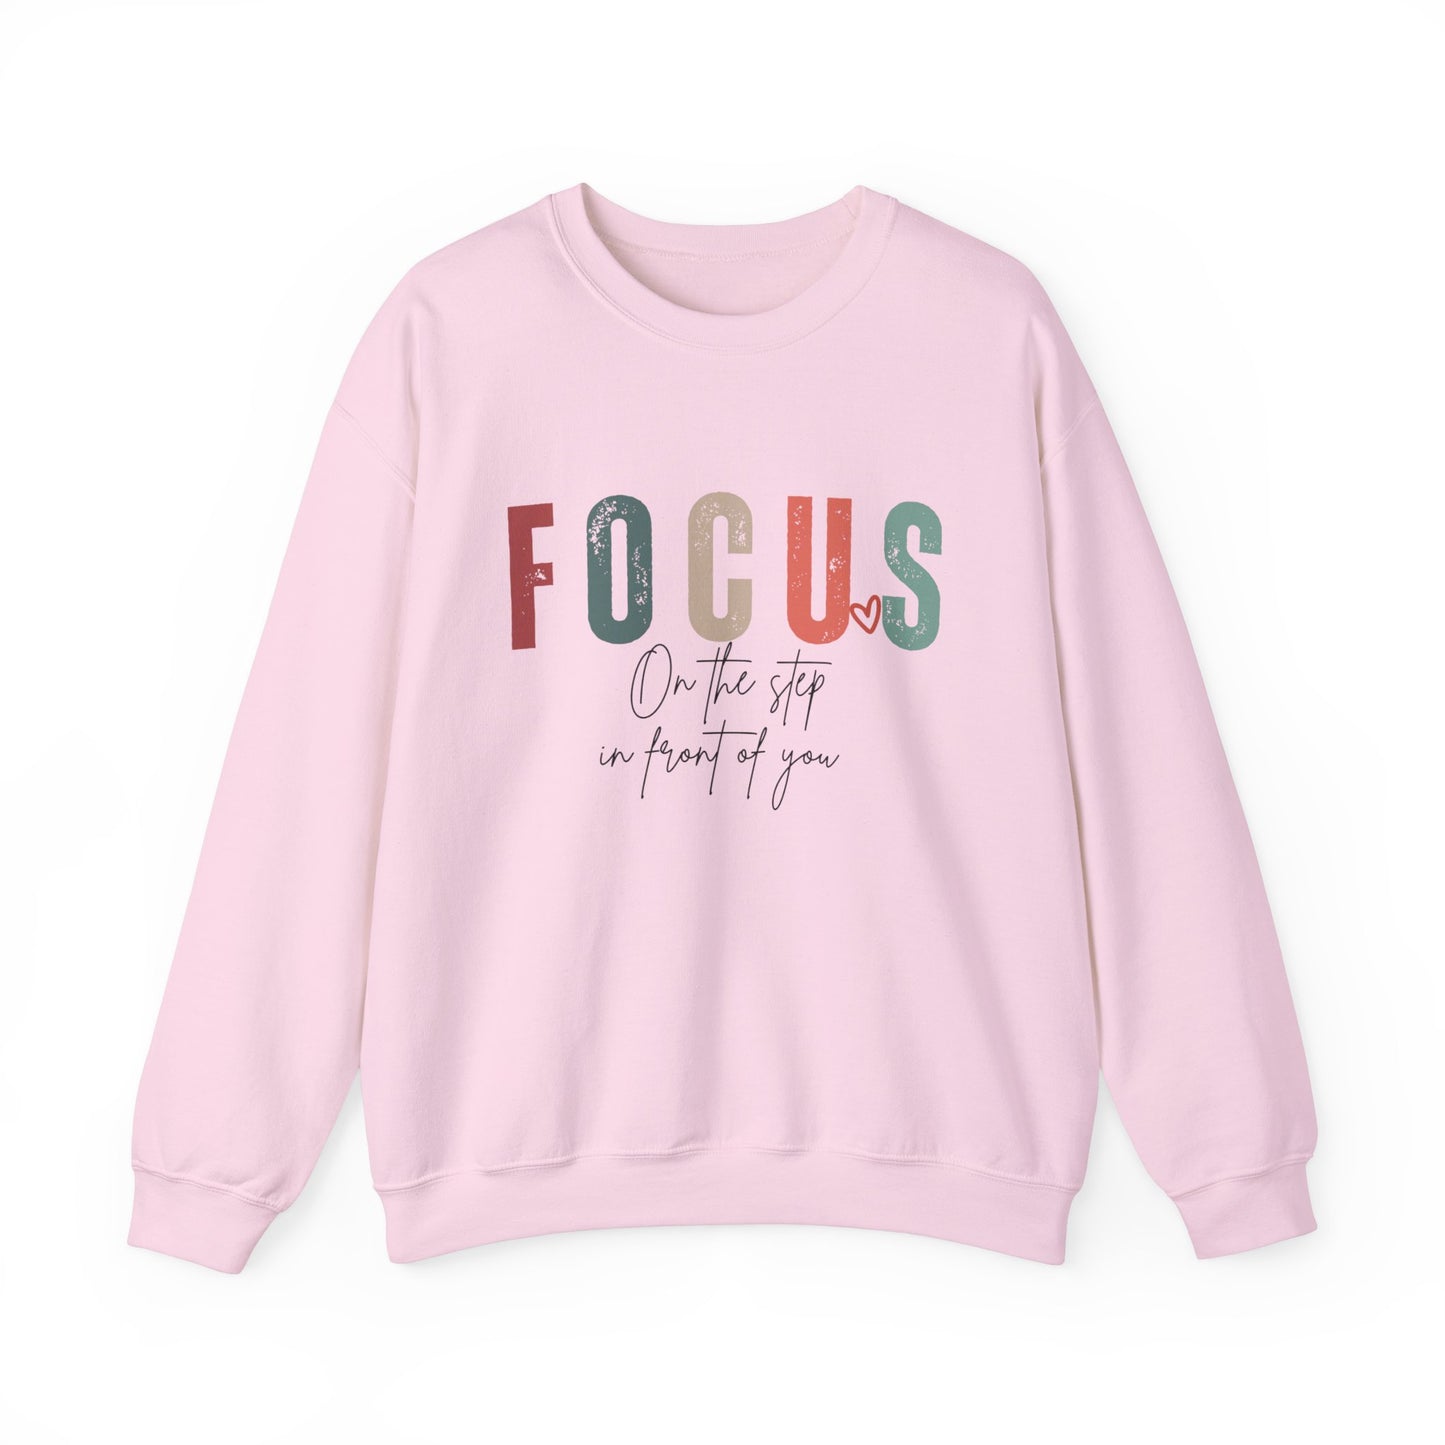 Focus on the step in front of you Women's Sweatshirt